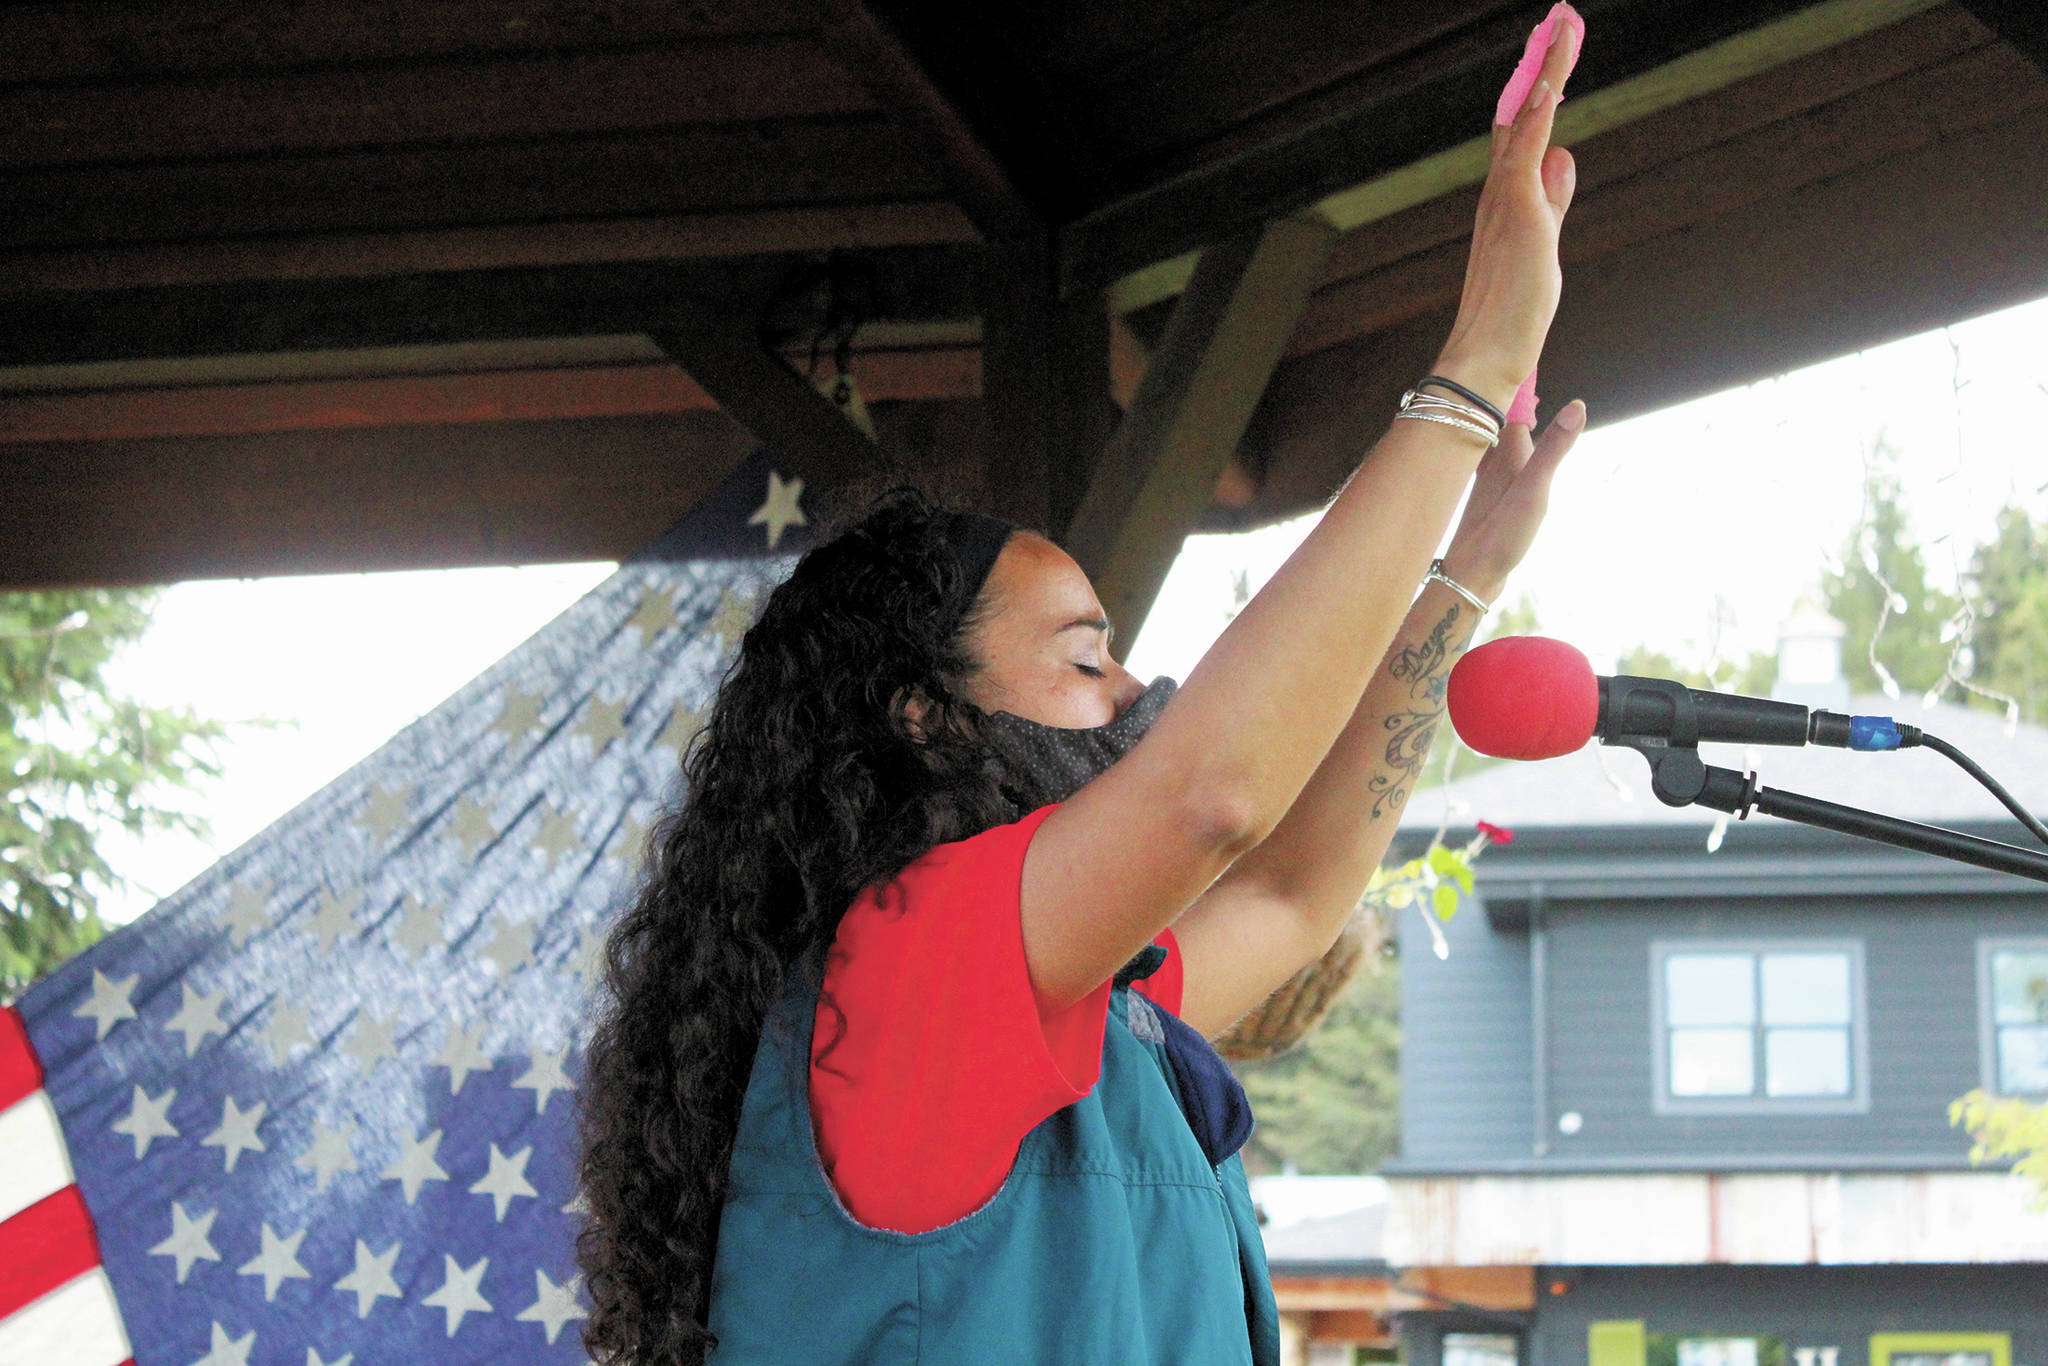 Winter Marshall-Allen, a local teacher and co-organizer of Homer’s first Juneteenth celebration, raises her hands while singing along to a faith song at the Friday, June 19, 2020 celebration at WKFL Park in Homer, Alaska. (Photo by Megan Pacer/Homer News)